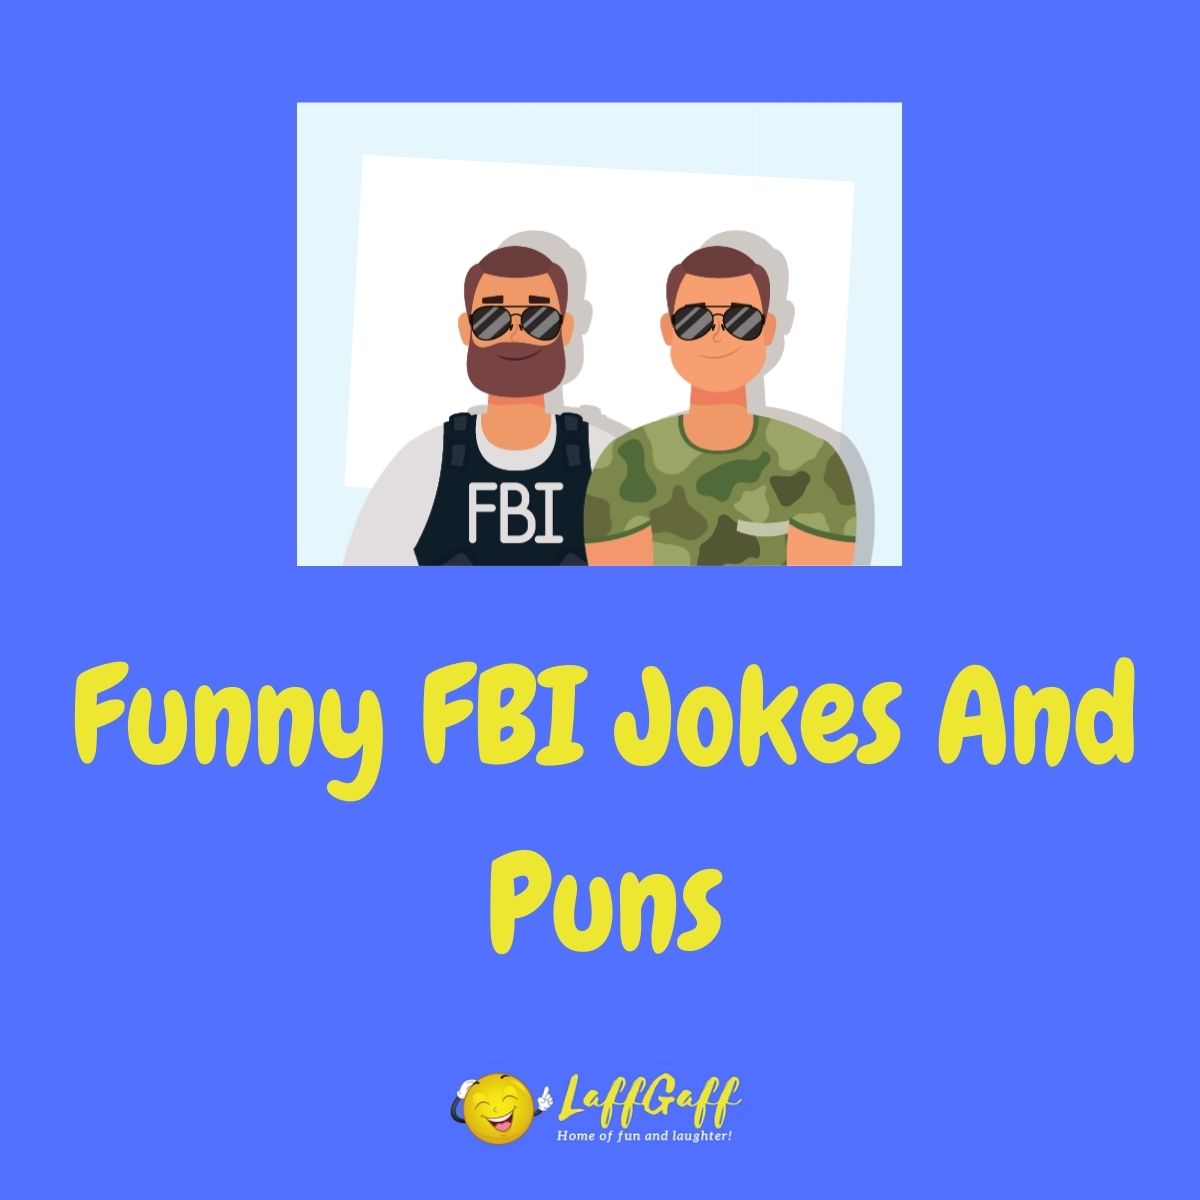 Featured image for a page of funny FBI jokes and puns.